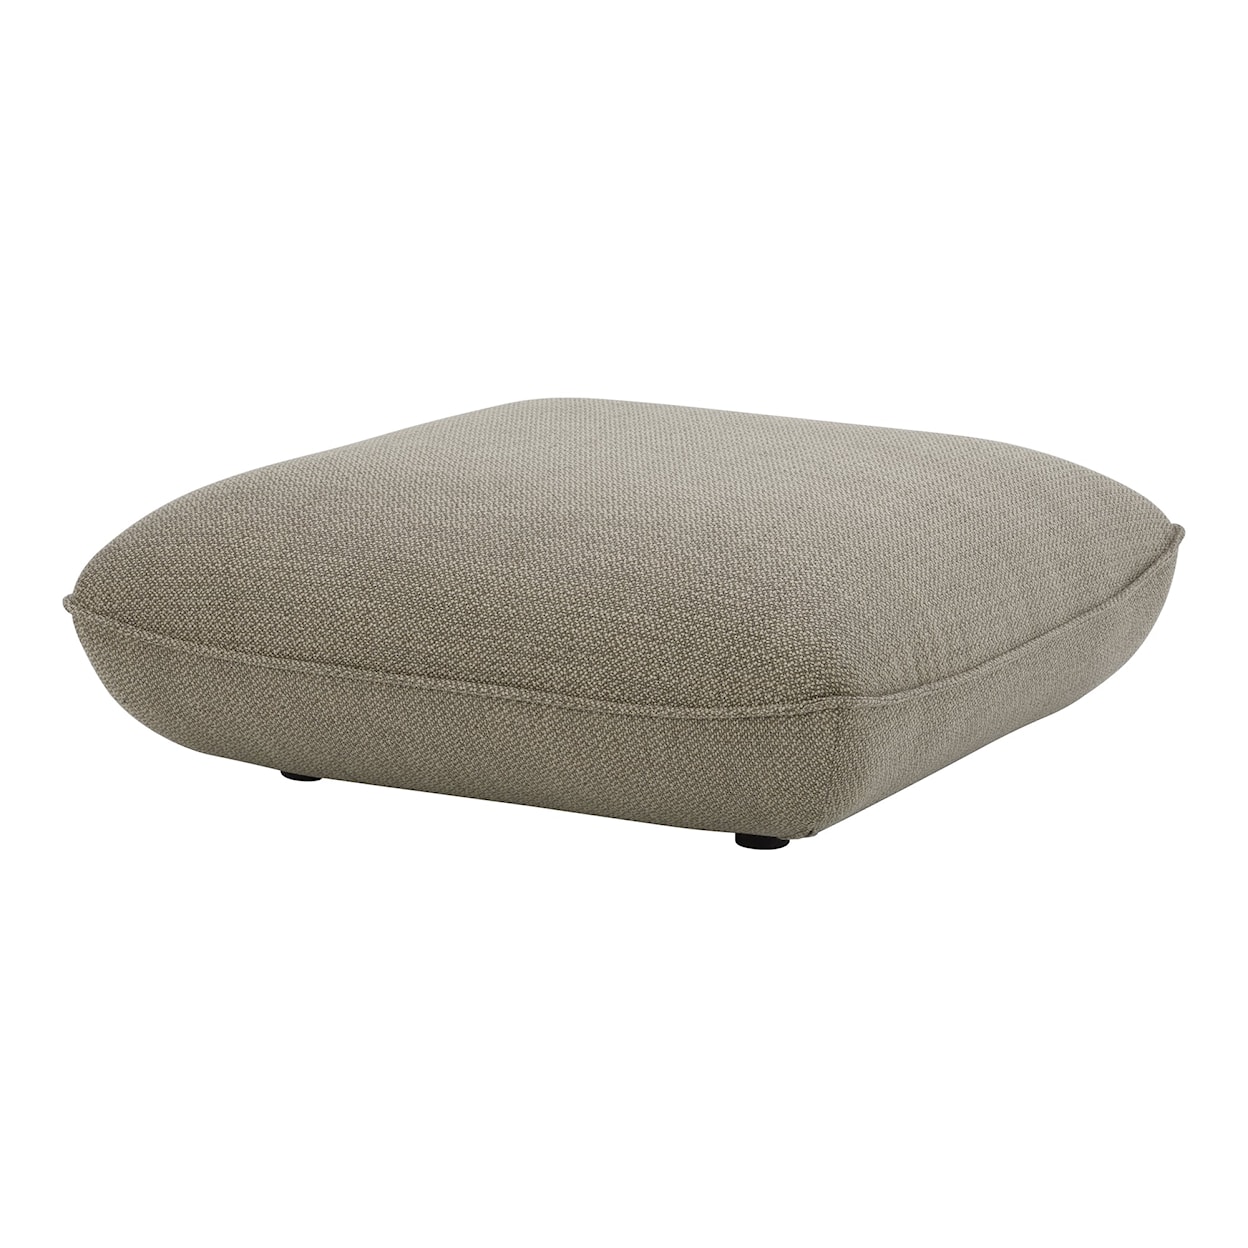 Moe's Home Collection Zeppelin Speckled Pumice Ottoman 